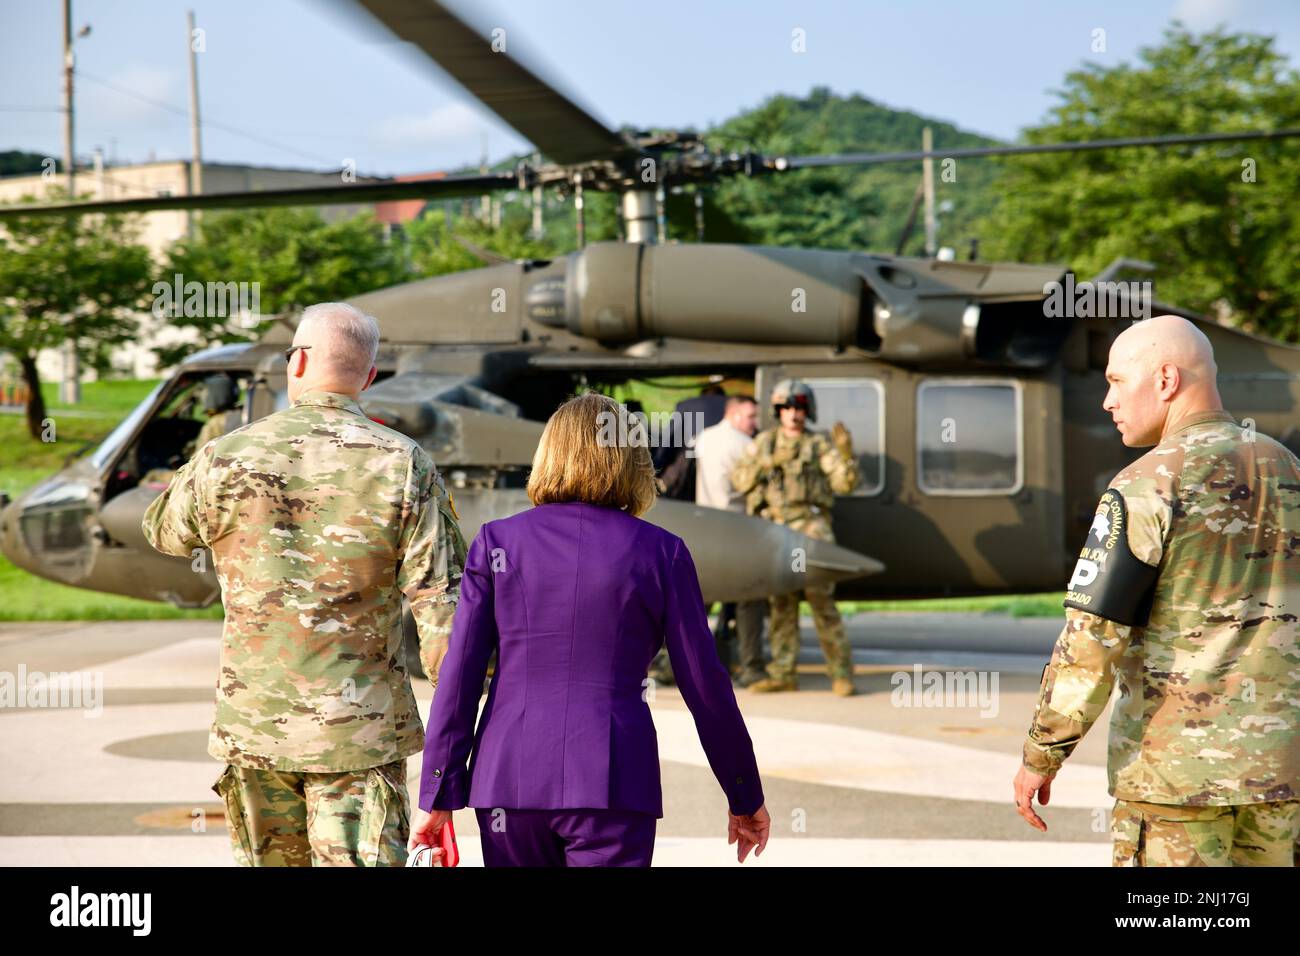 Nancy Pelosi, Speaker of the United States House of Representatives, led a congressional delegation to visit the DMZ/JSA to engage with service members stationed there. Nancy Pelosi boards UH-60M helicopters from Comhawk Flight Detachment with Gen. Paul LaCamera, Commander of U.S. Forces Korea.    Soldiers from B Co., 3-2 General Support Aviation Battalion and Comhawk Flight Detachment supported flying the Speaker of the House and staff on her visit to the DMZ and Osan Airbase on August 4, 2022. Stock Photo